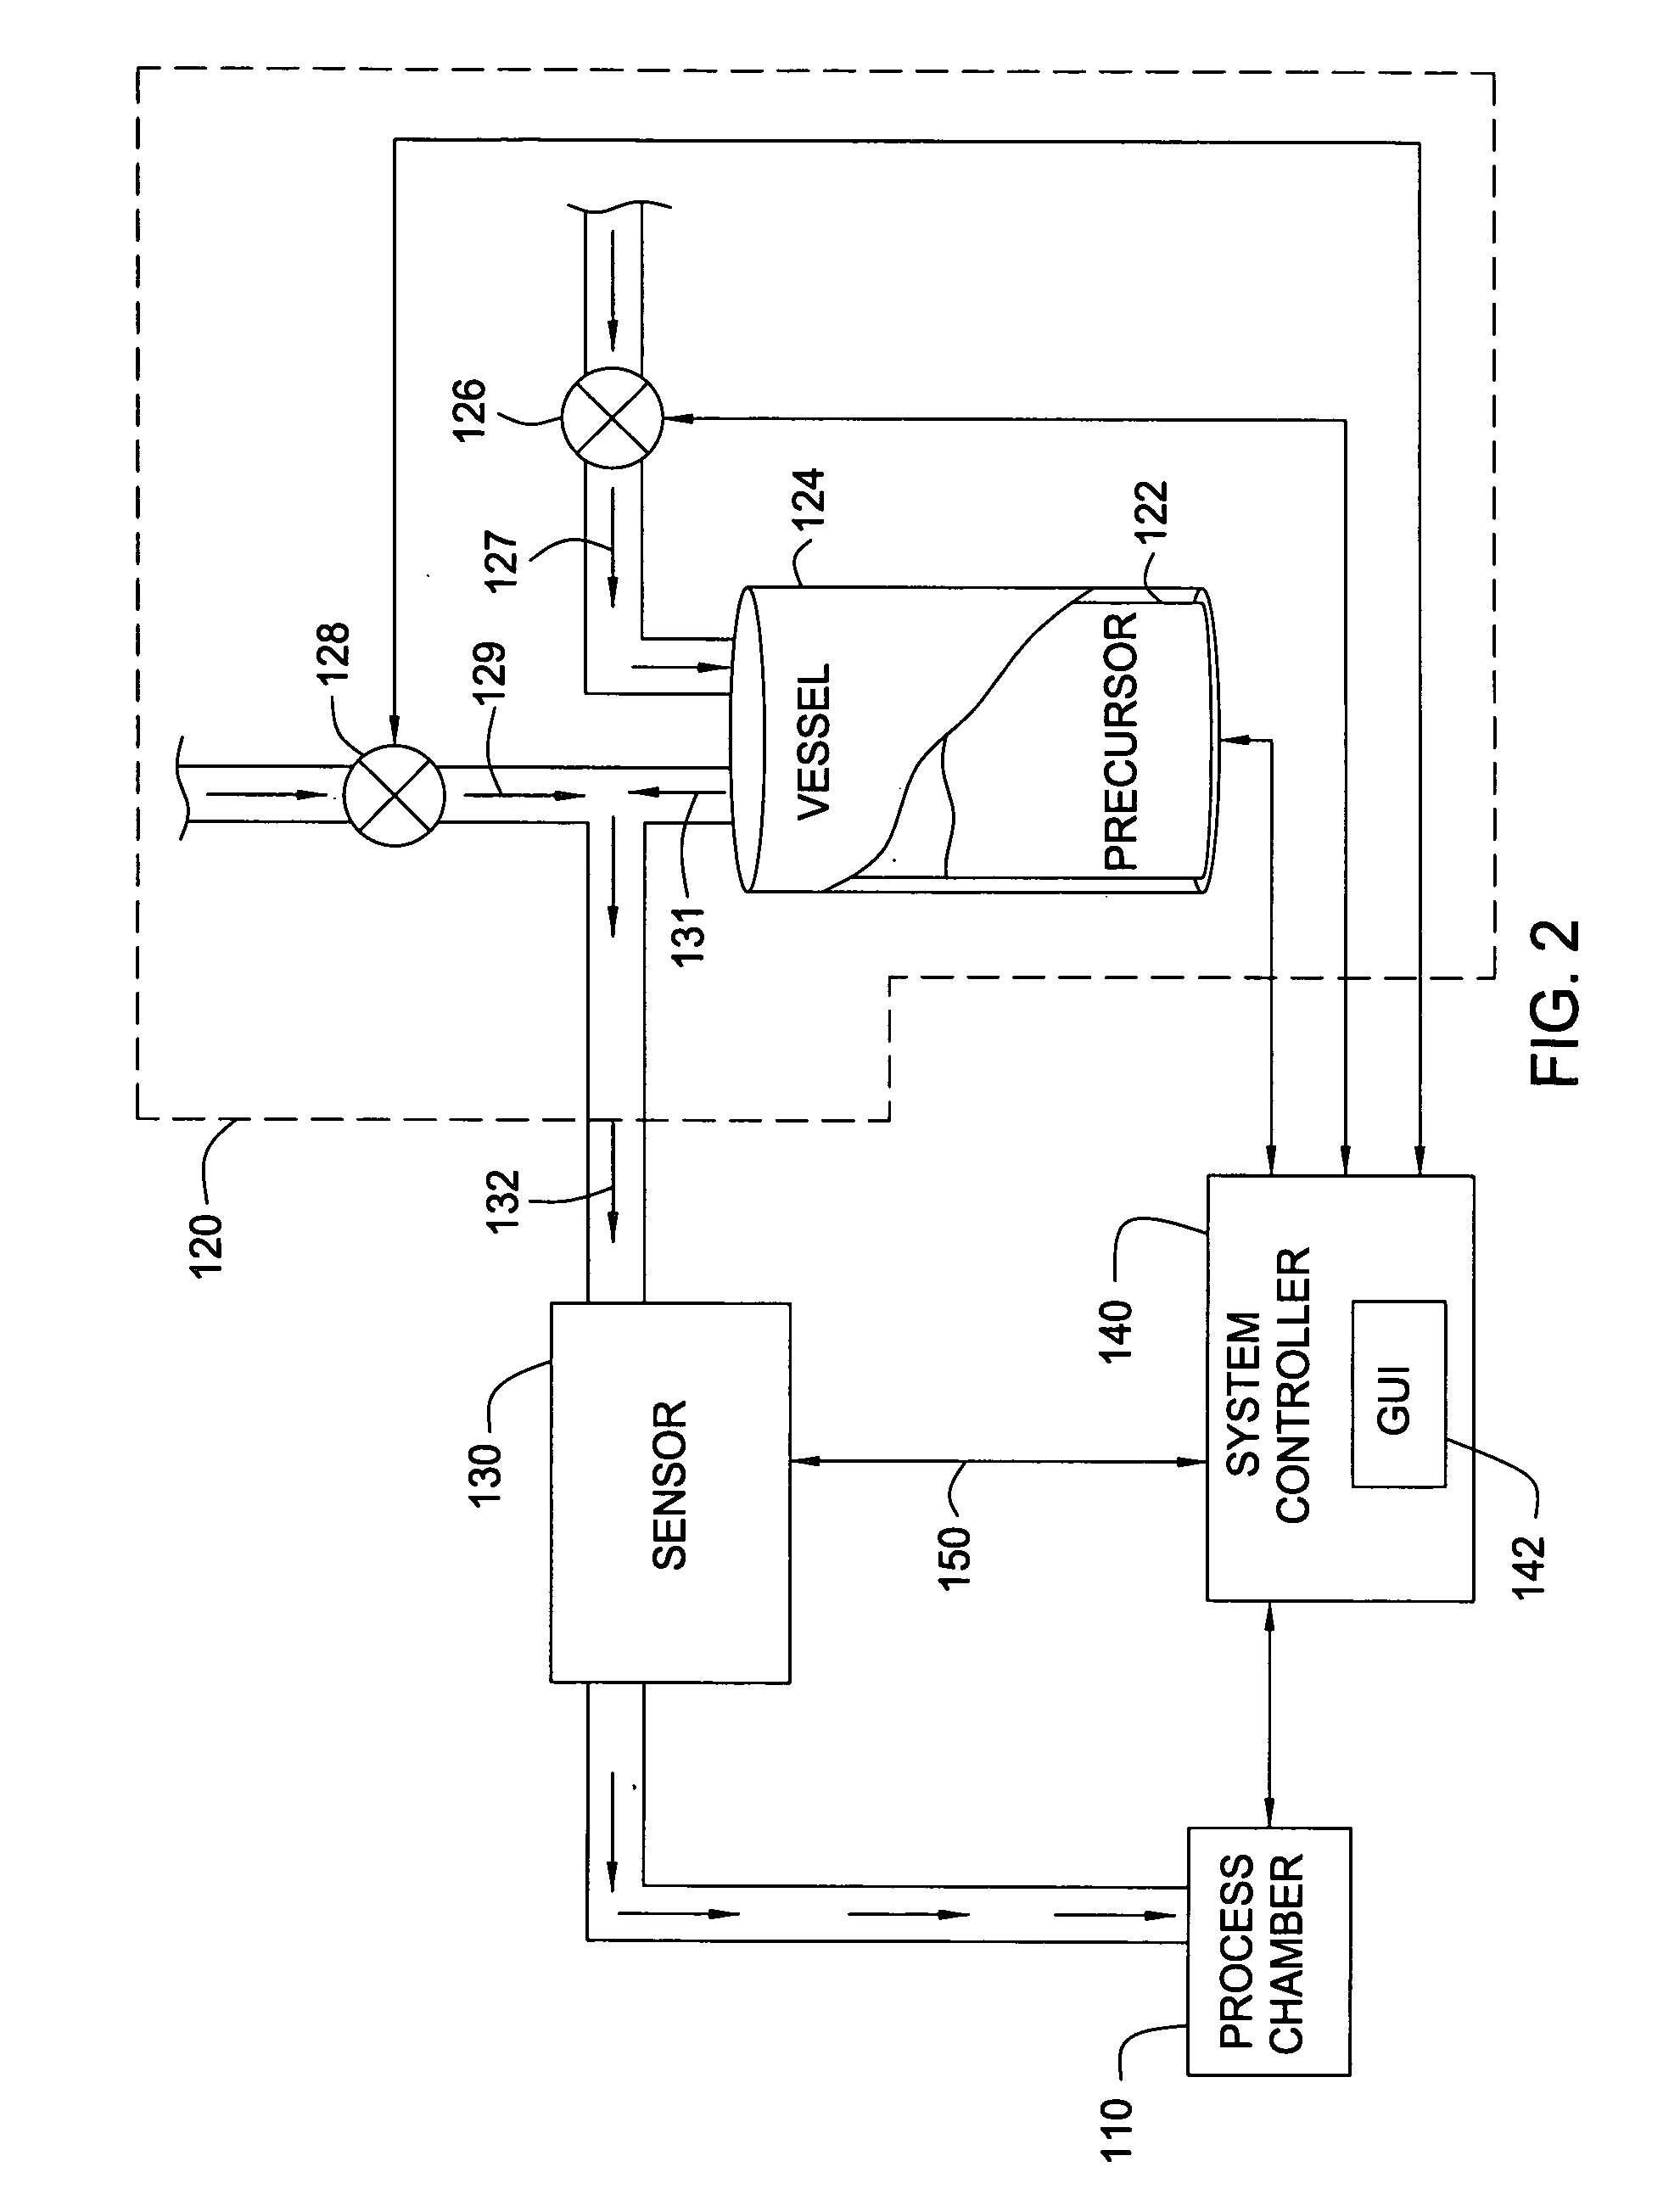 Precursor delivery system with rate control